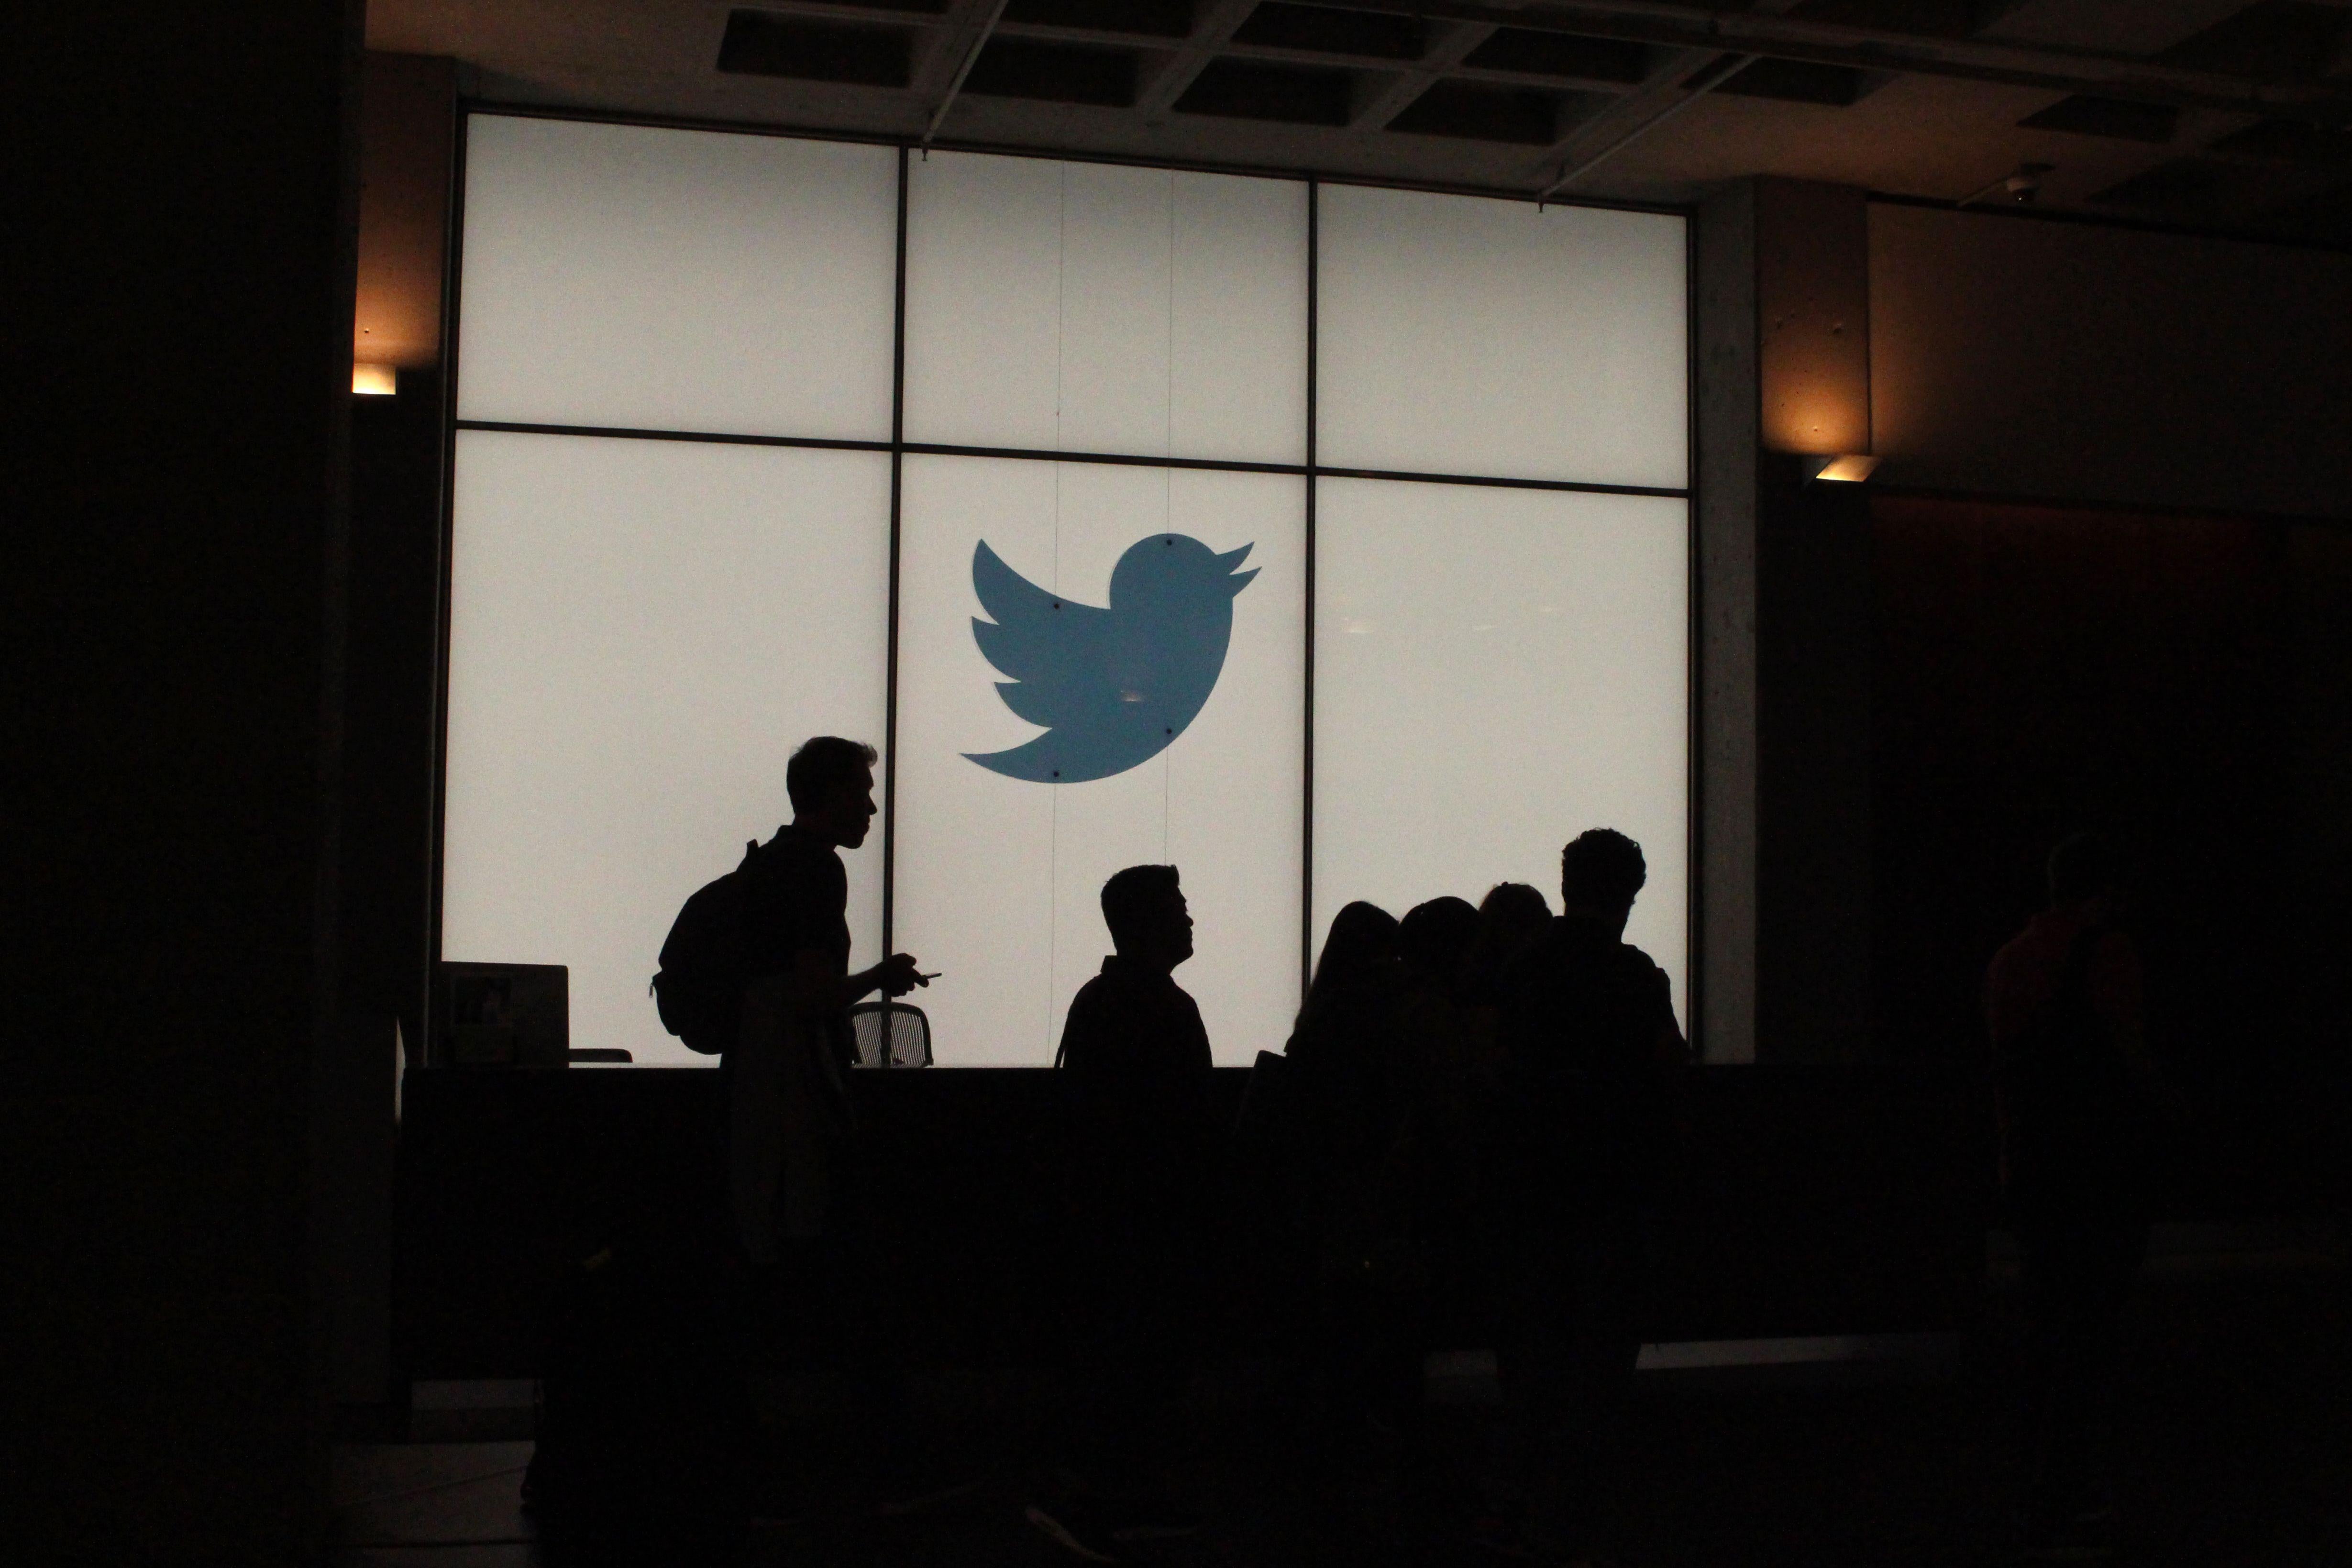 Silhouettes of employees walking by a lit up Twitter sign